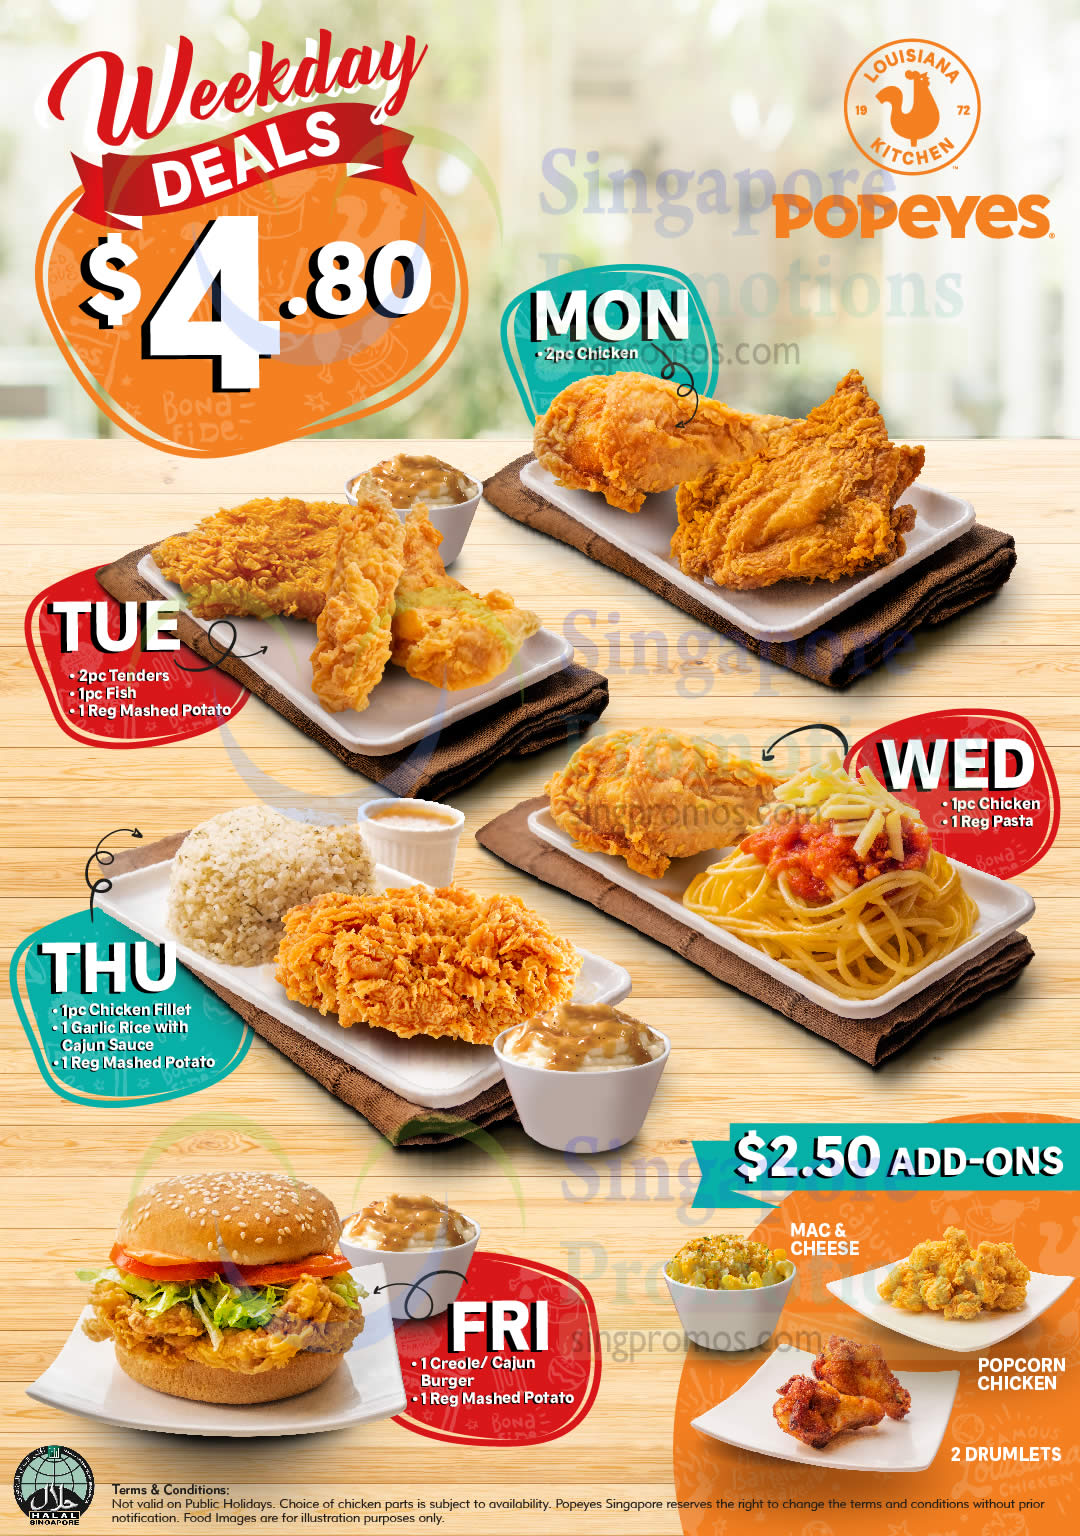 popeyes-launches-new-weekday-deals-fr-4-80-from-2-march-2020